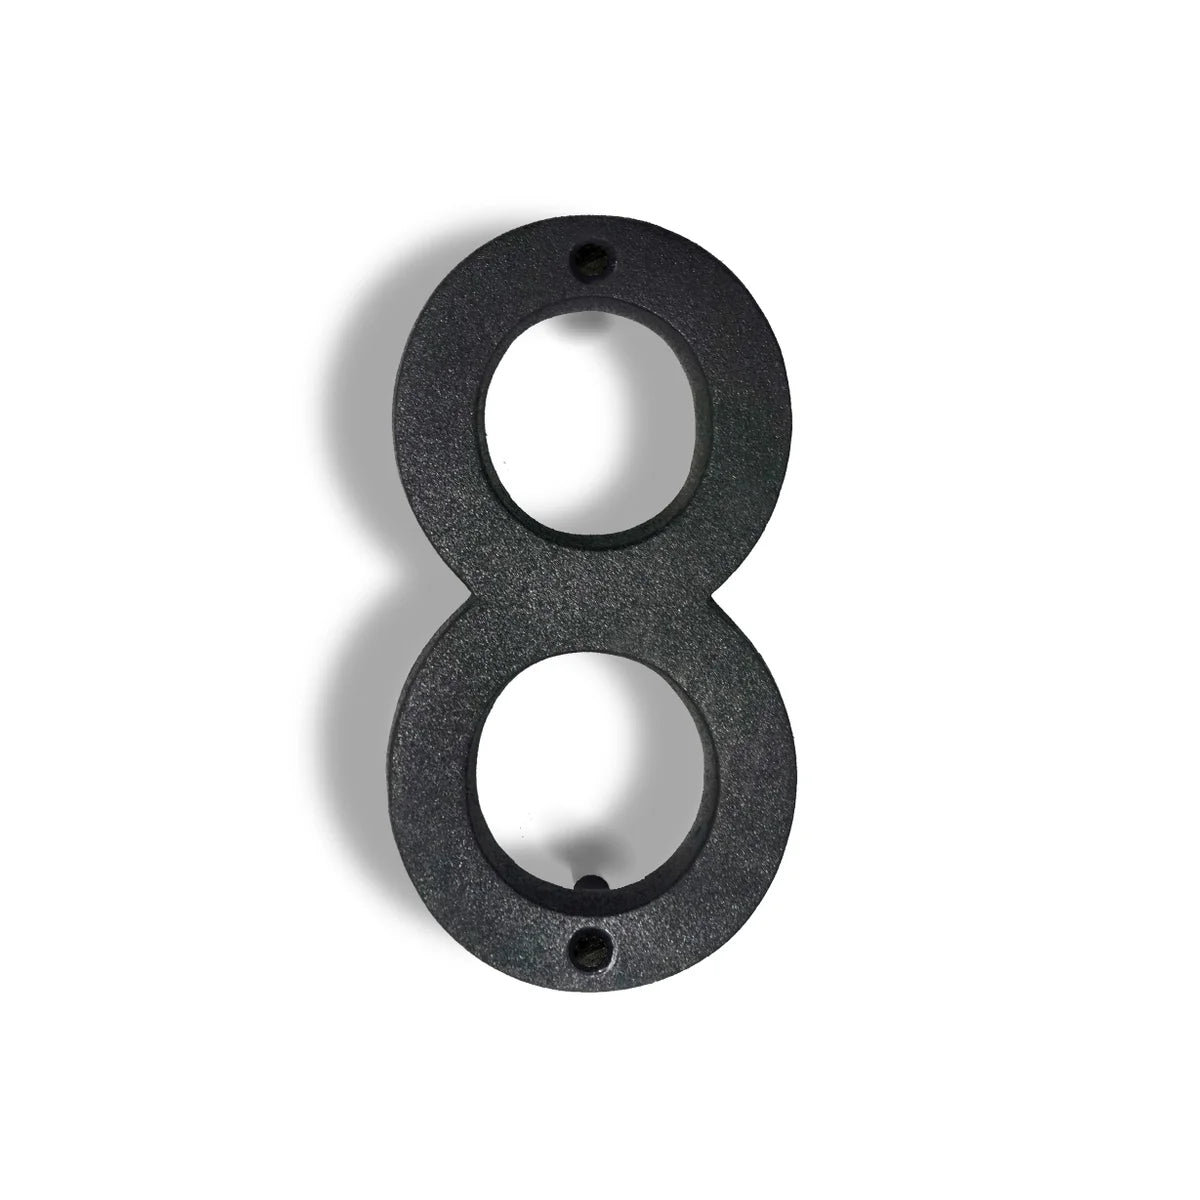 Wrought iron floating house numbers 6.5"